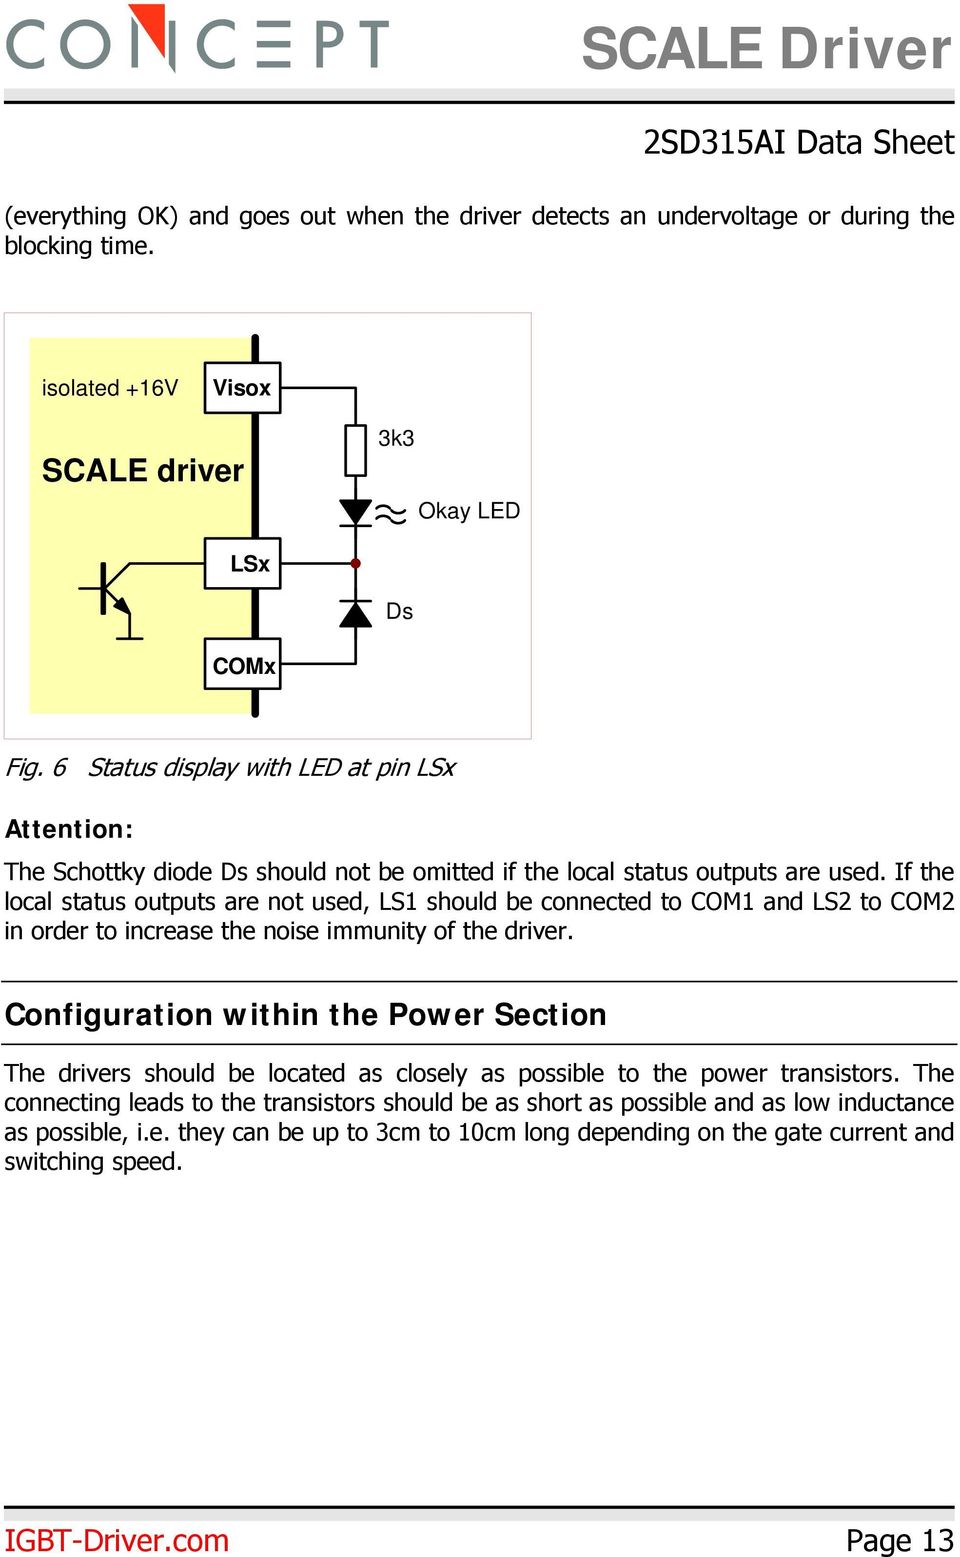 If the local status outputs are not used, LS1 should be connected to COM1 and LS2 to COM2 in order to increase the noise immunity of the driver.